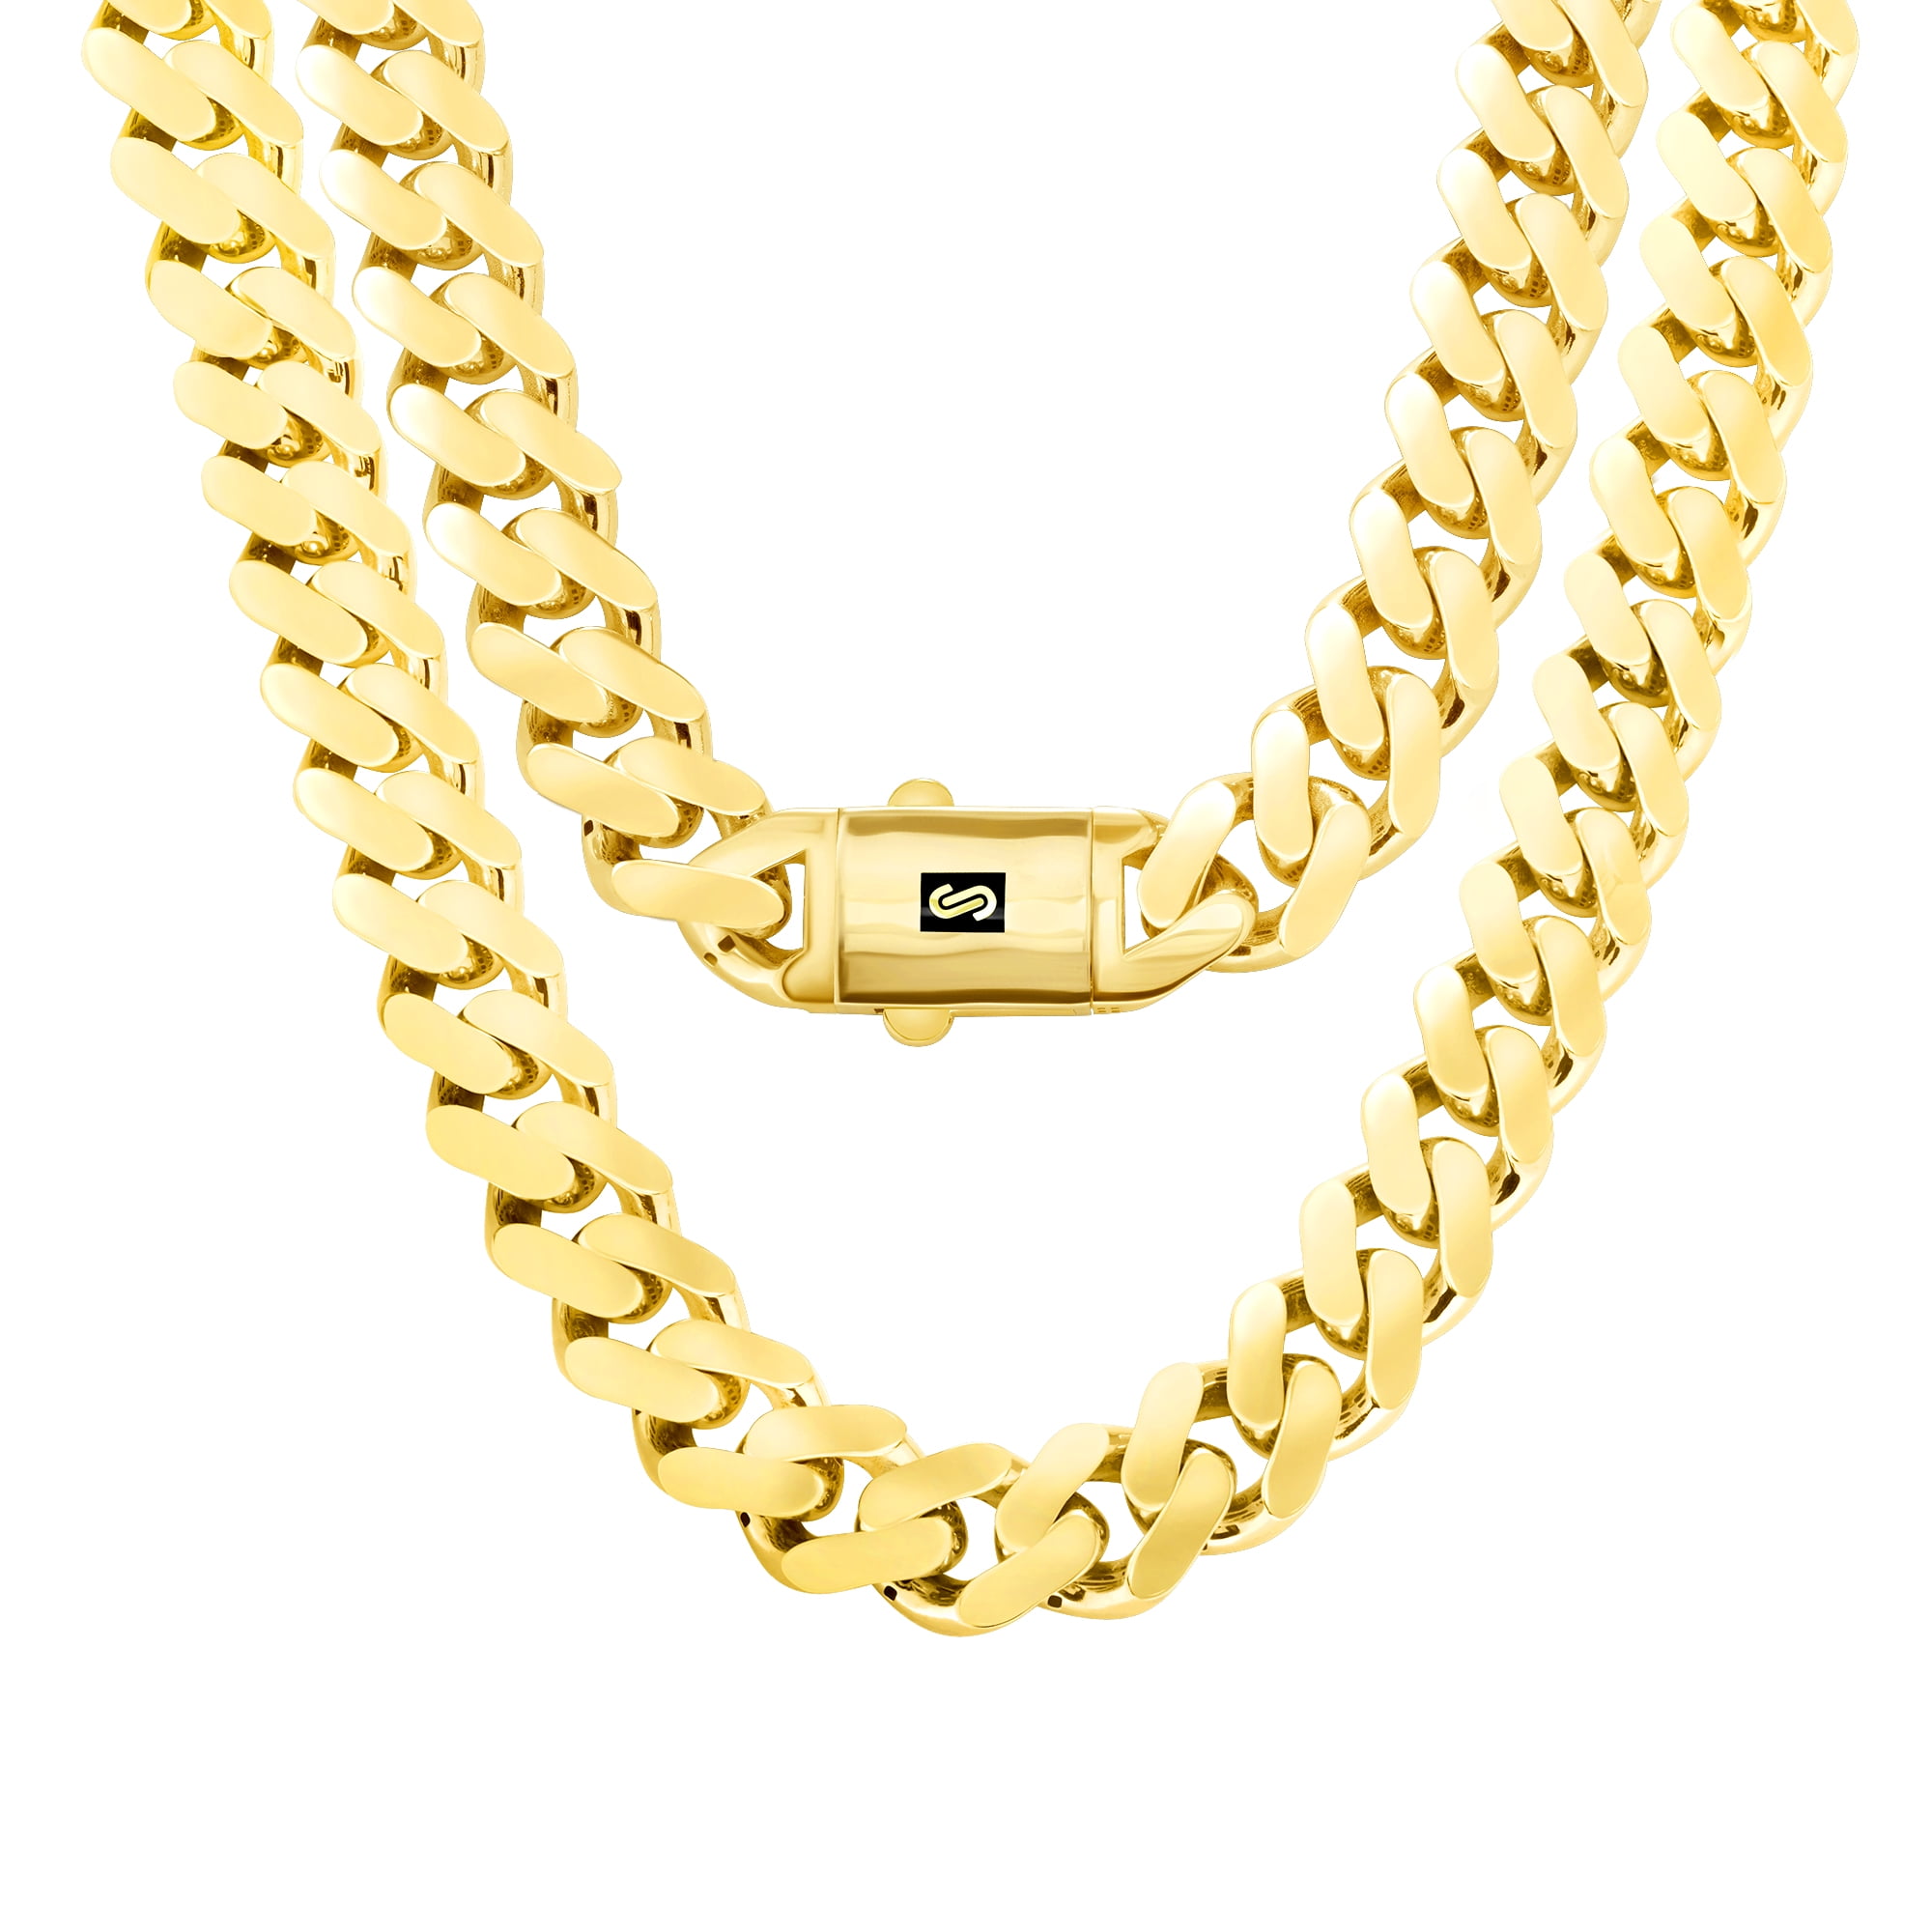 MENS 15mm BLACK FINISH MIAMI CUBAN LINK CHAIN NECKLACE  36" to 20" 